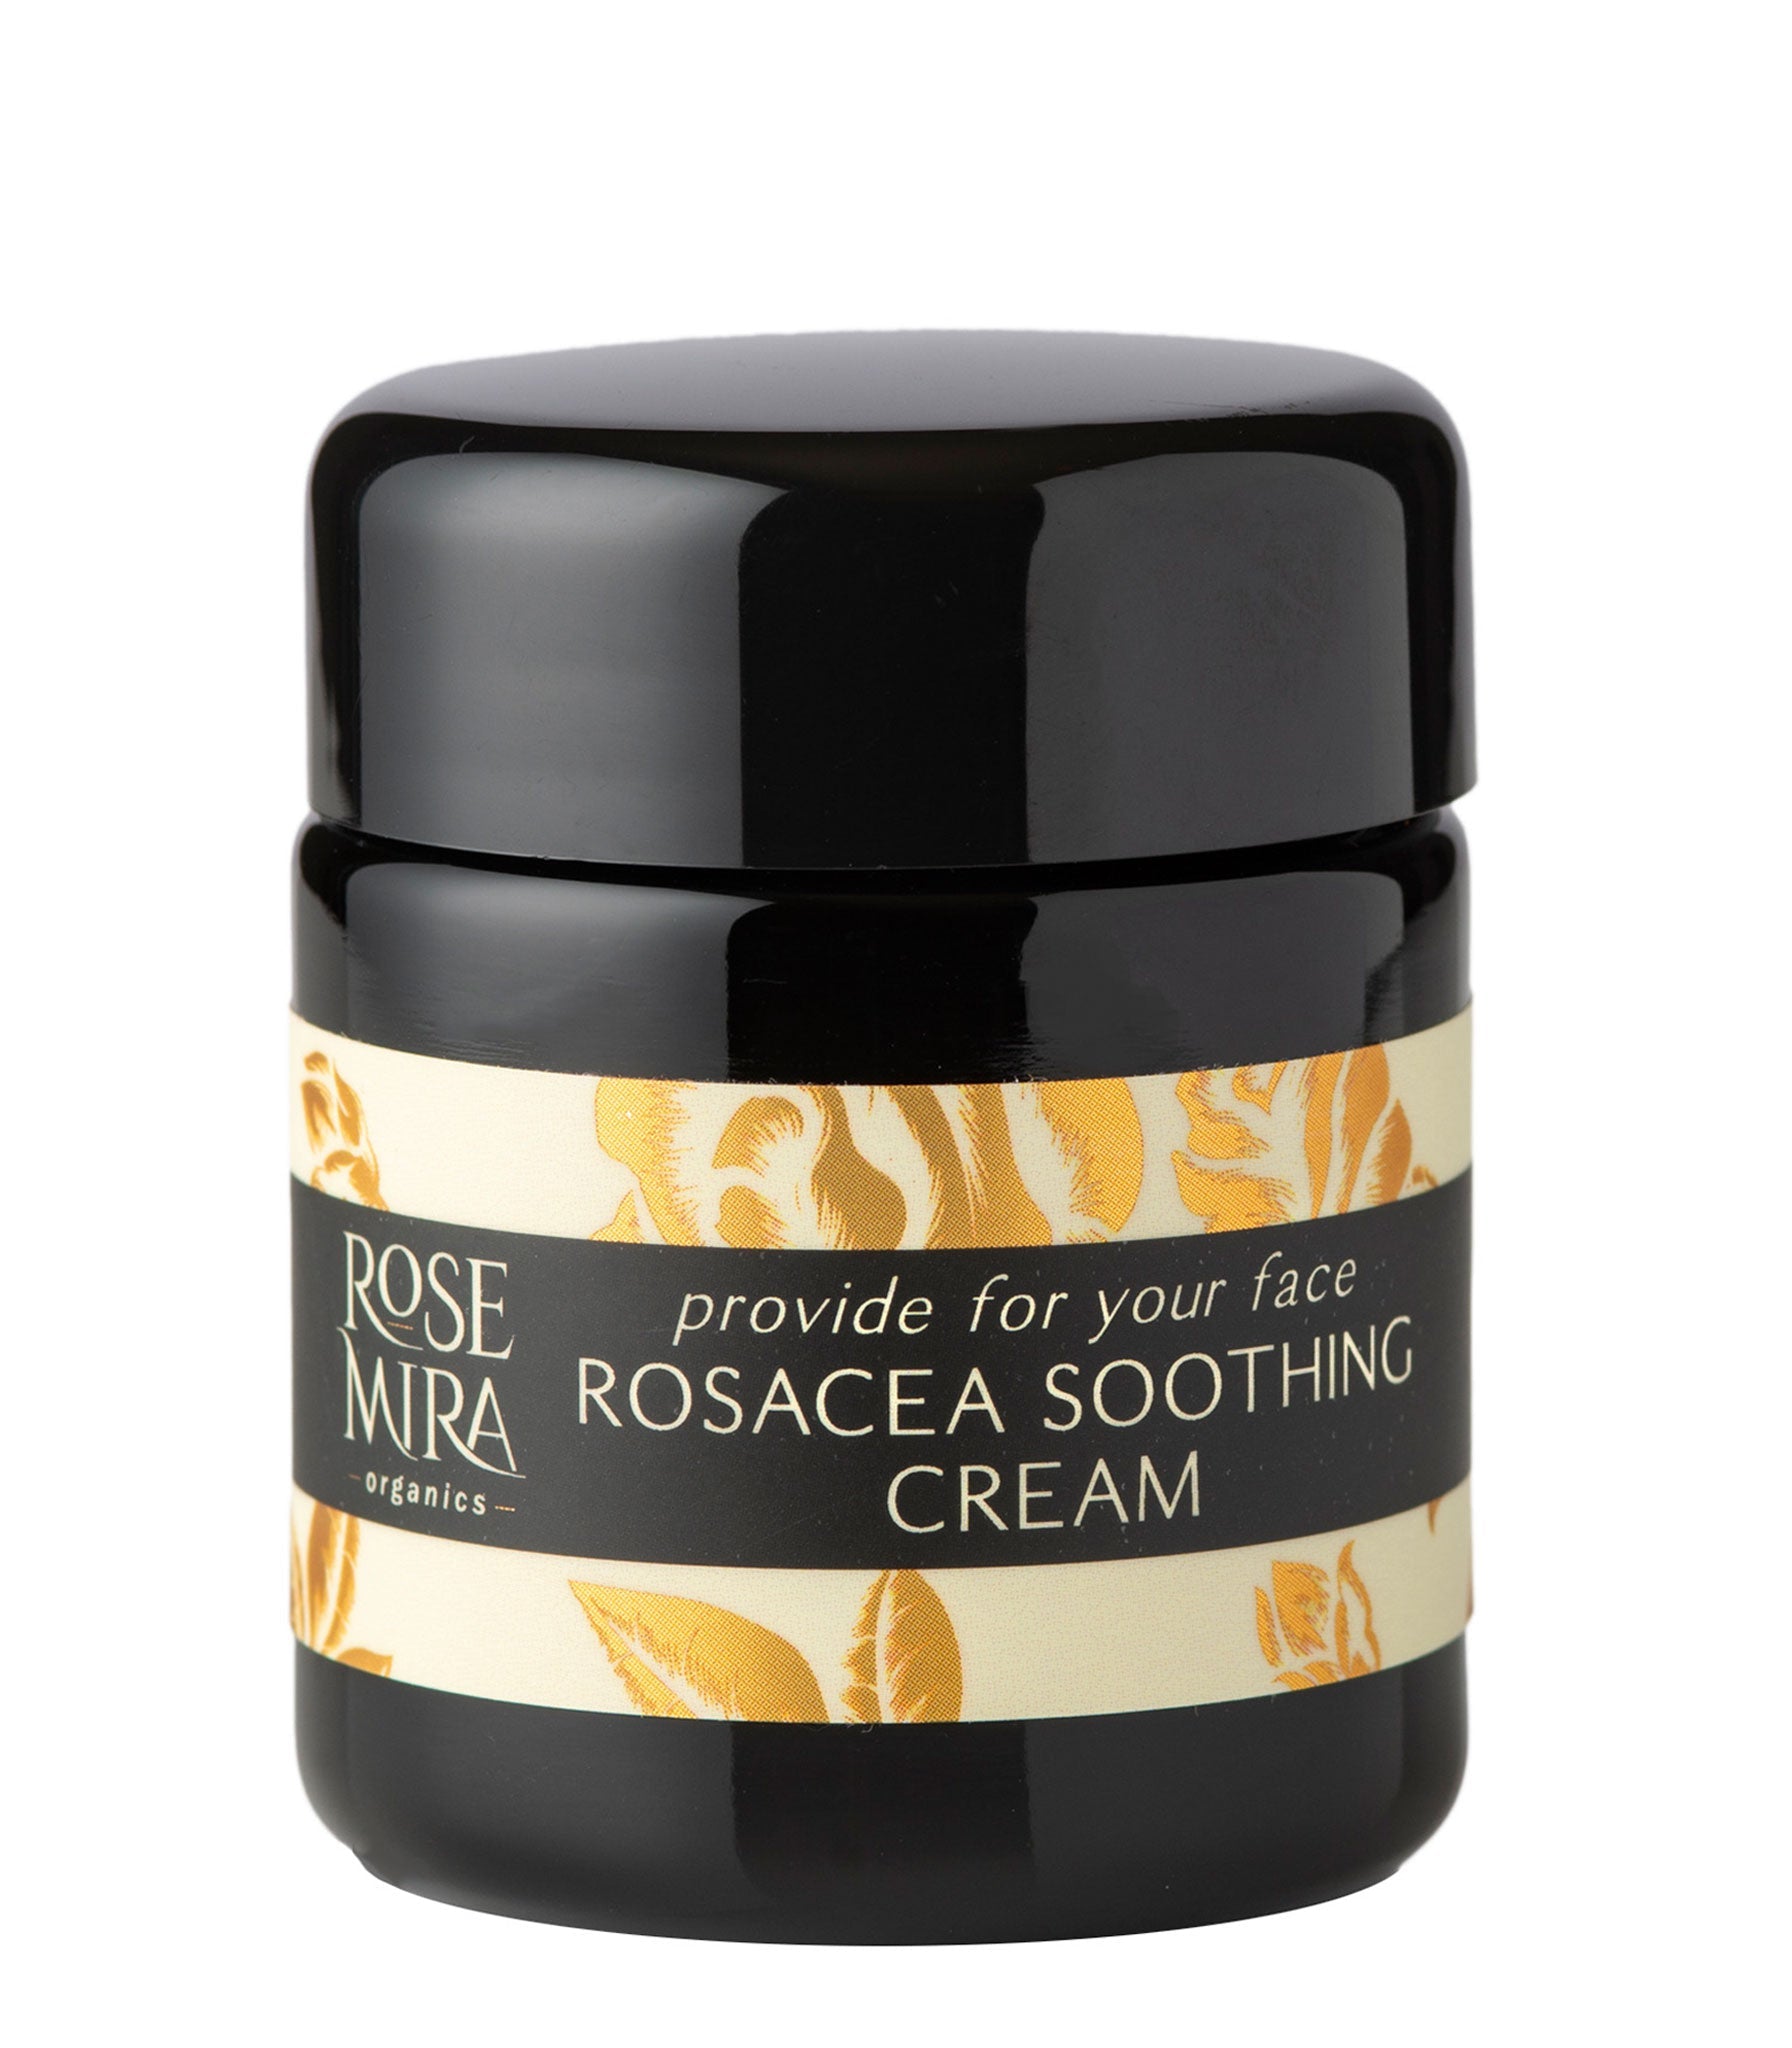 Provide For Your Face - Rosacea Soothing Cream by Rosemira